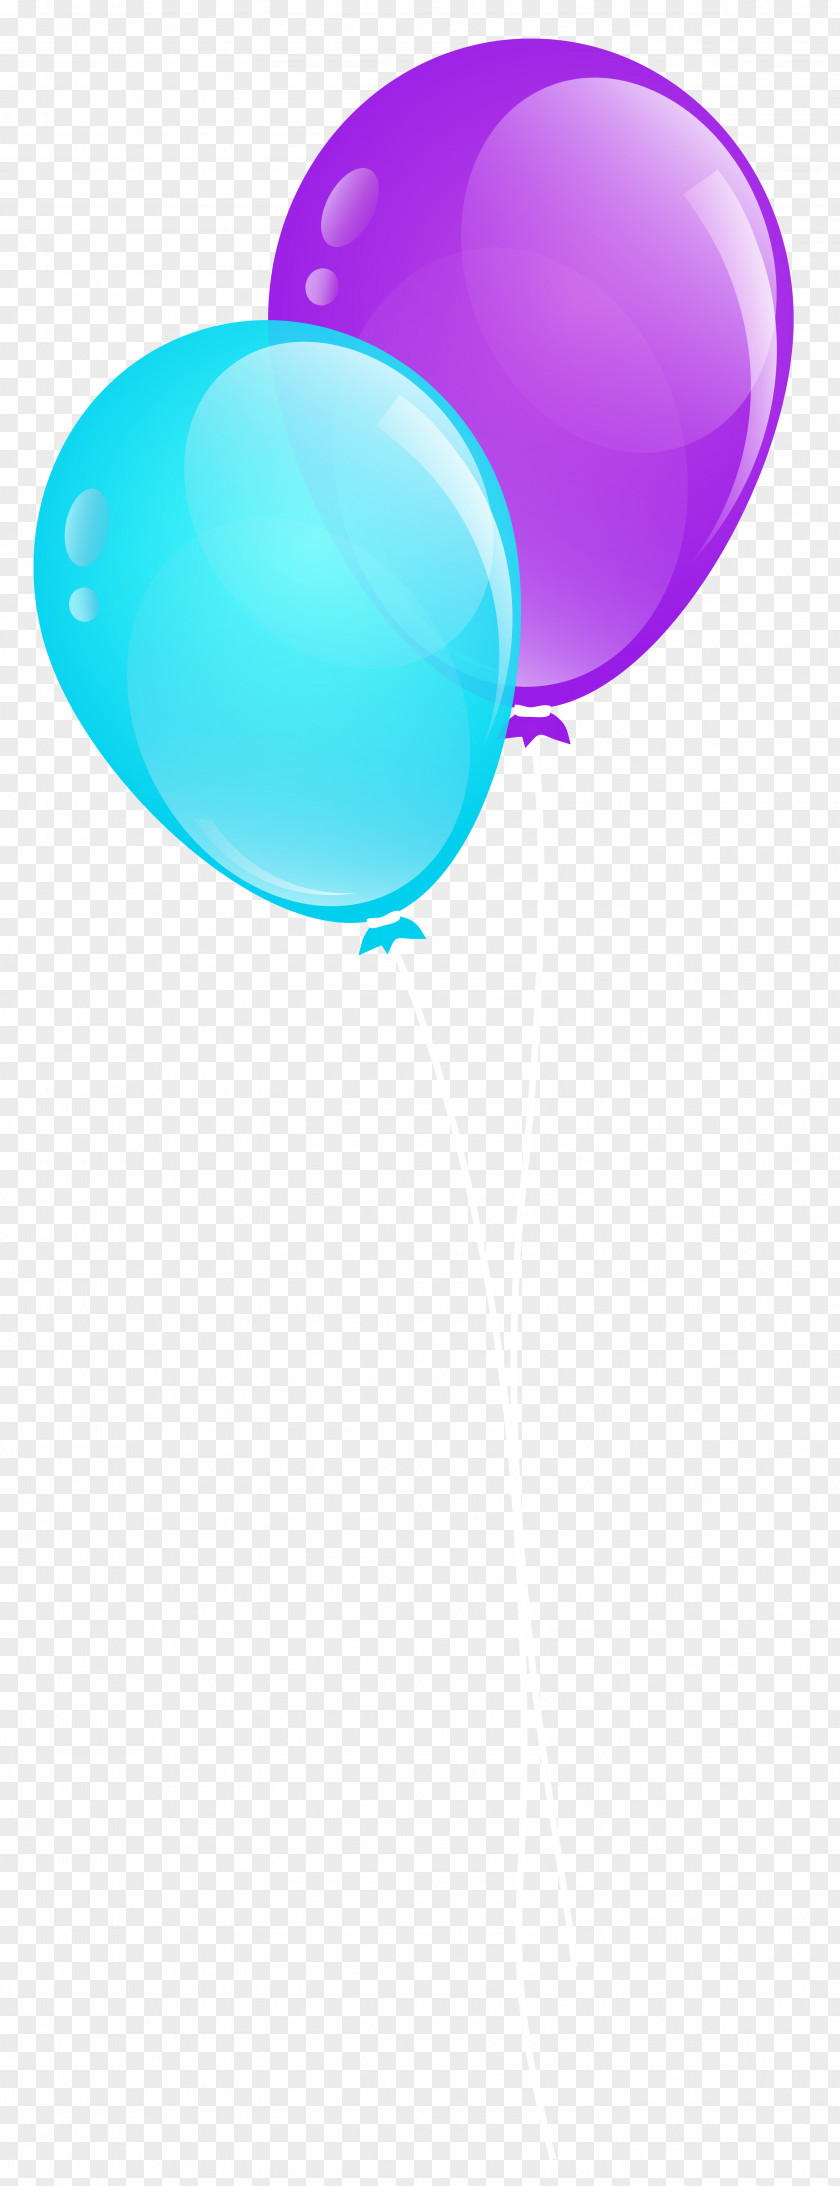 Blue And Purple Balloons Clip Art Image Balloon Stock Photography PNG